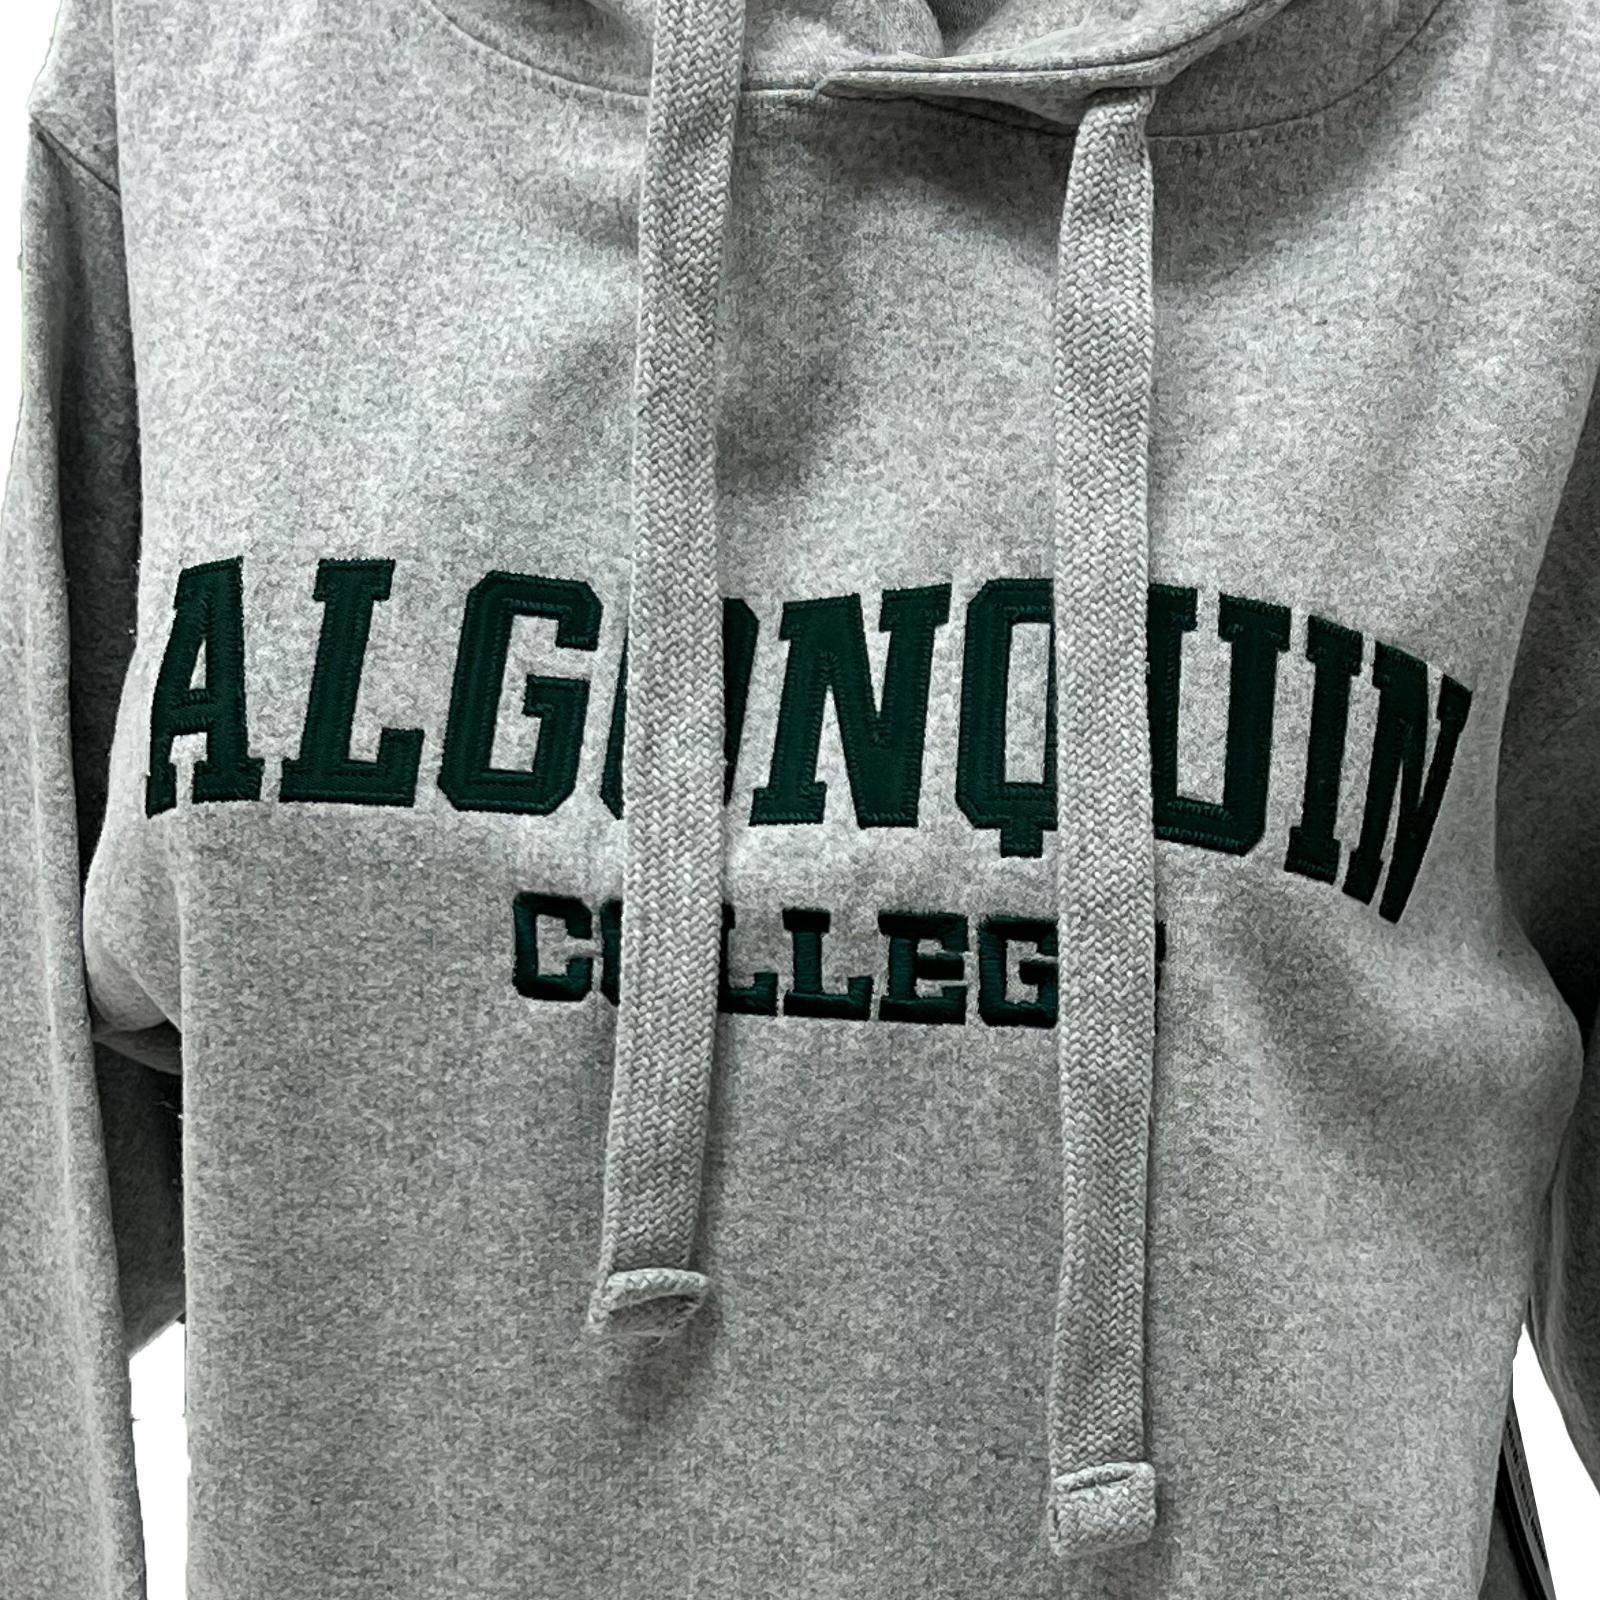 Layer Essential Hoodie - Athletic Grey - Connections - The Campus